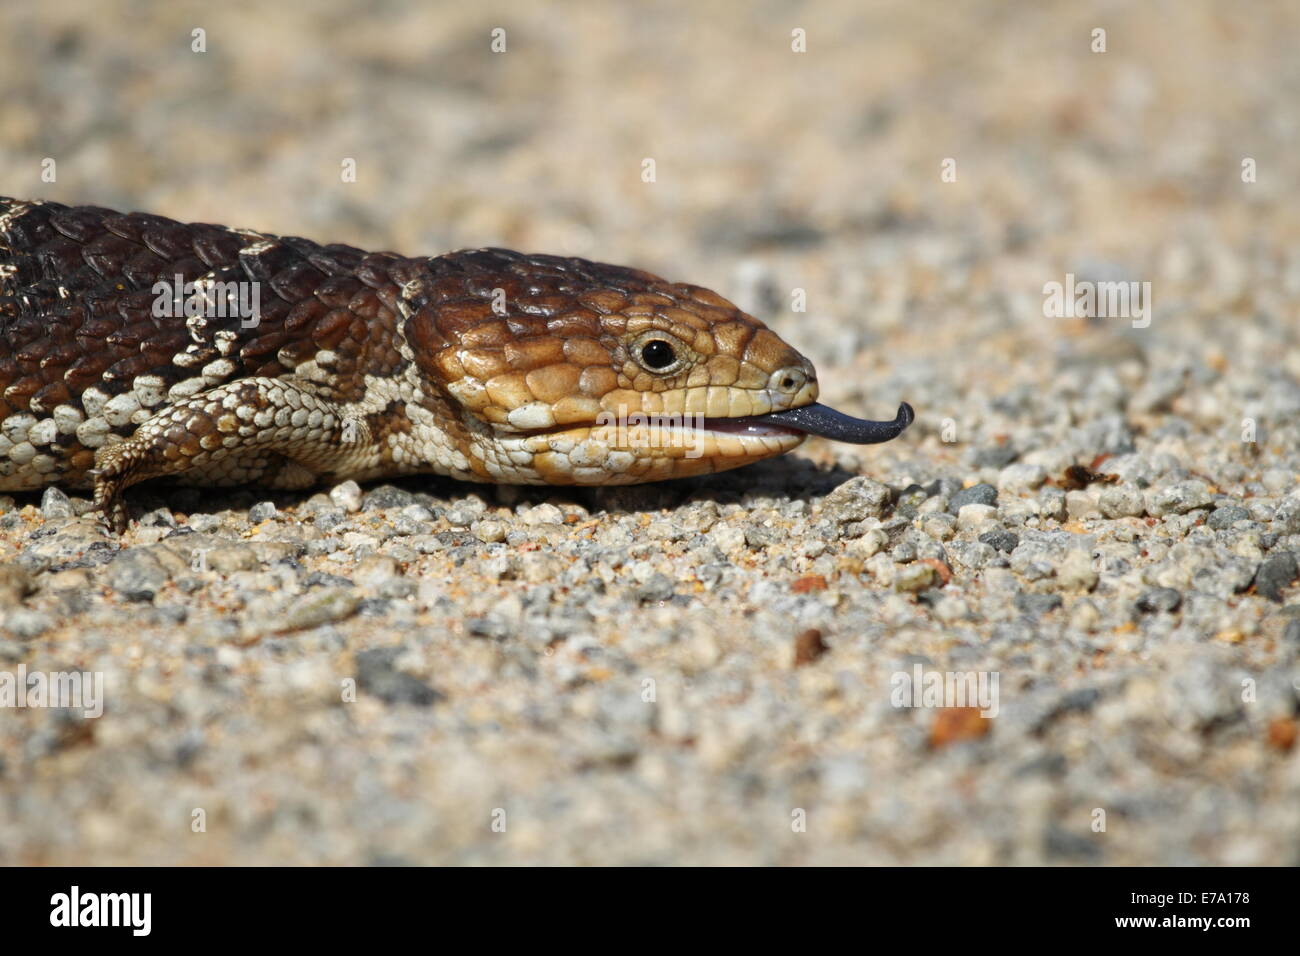 A blue-tongued lizard (correctly named blue-tongued skink) warms itself on a bitumen road one spring morning - Western Australia Stock Photo